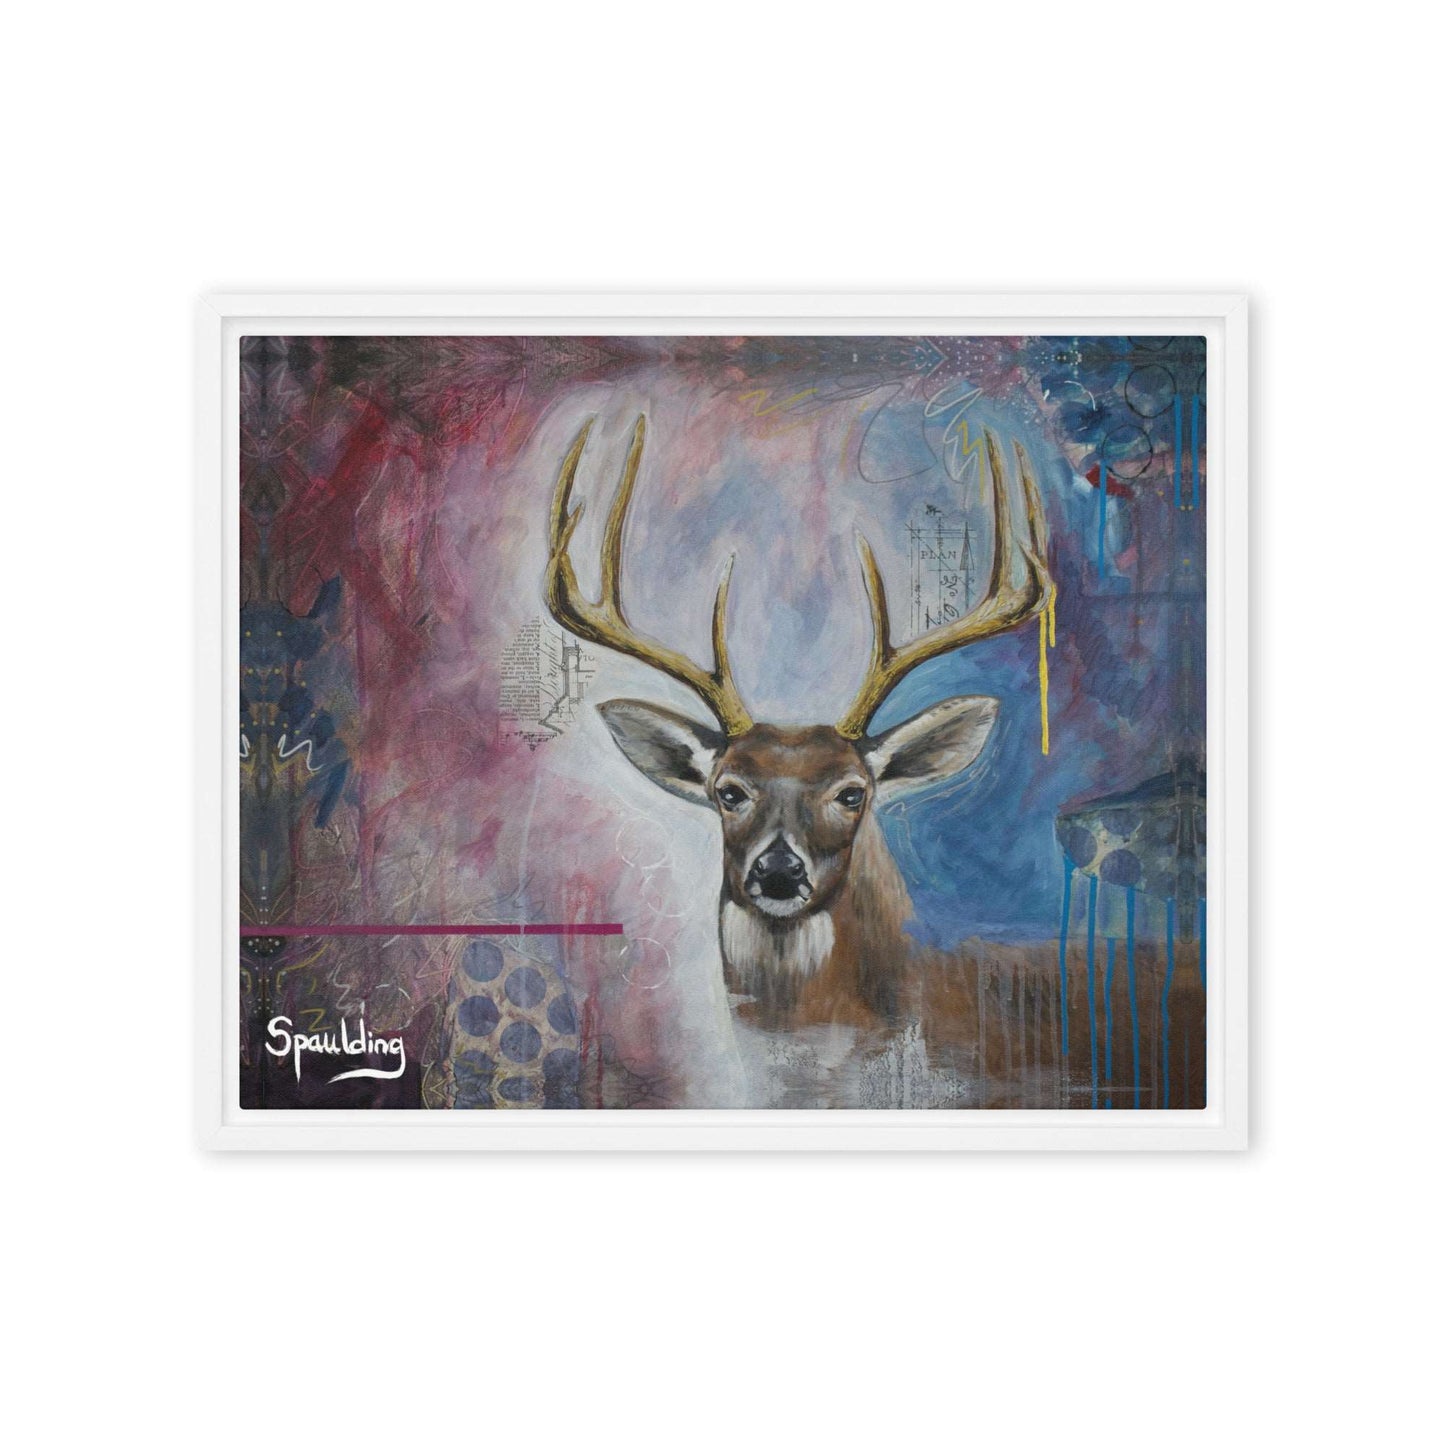 Framed canvas print with whitetail deer with antlers. Background color scheme is blues, whites, muted reds.